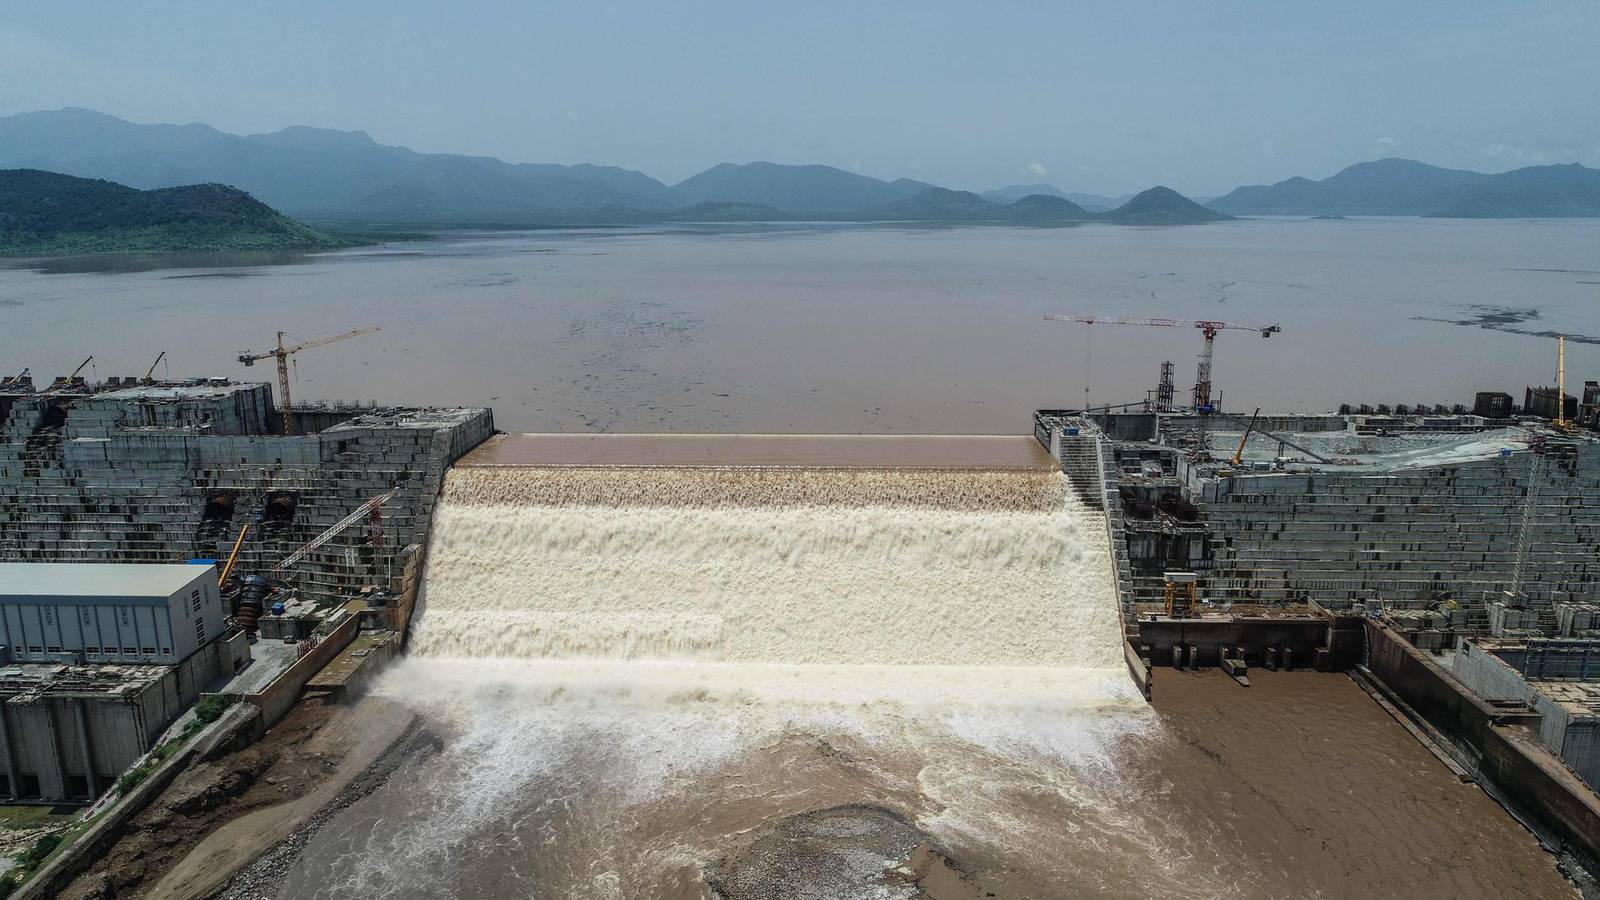 Egypt and Sudan: Second filling of Nile dam a 'dangerous escalation'